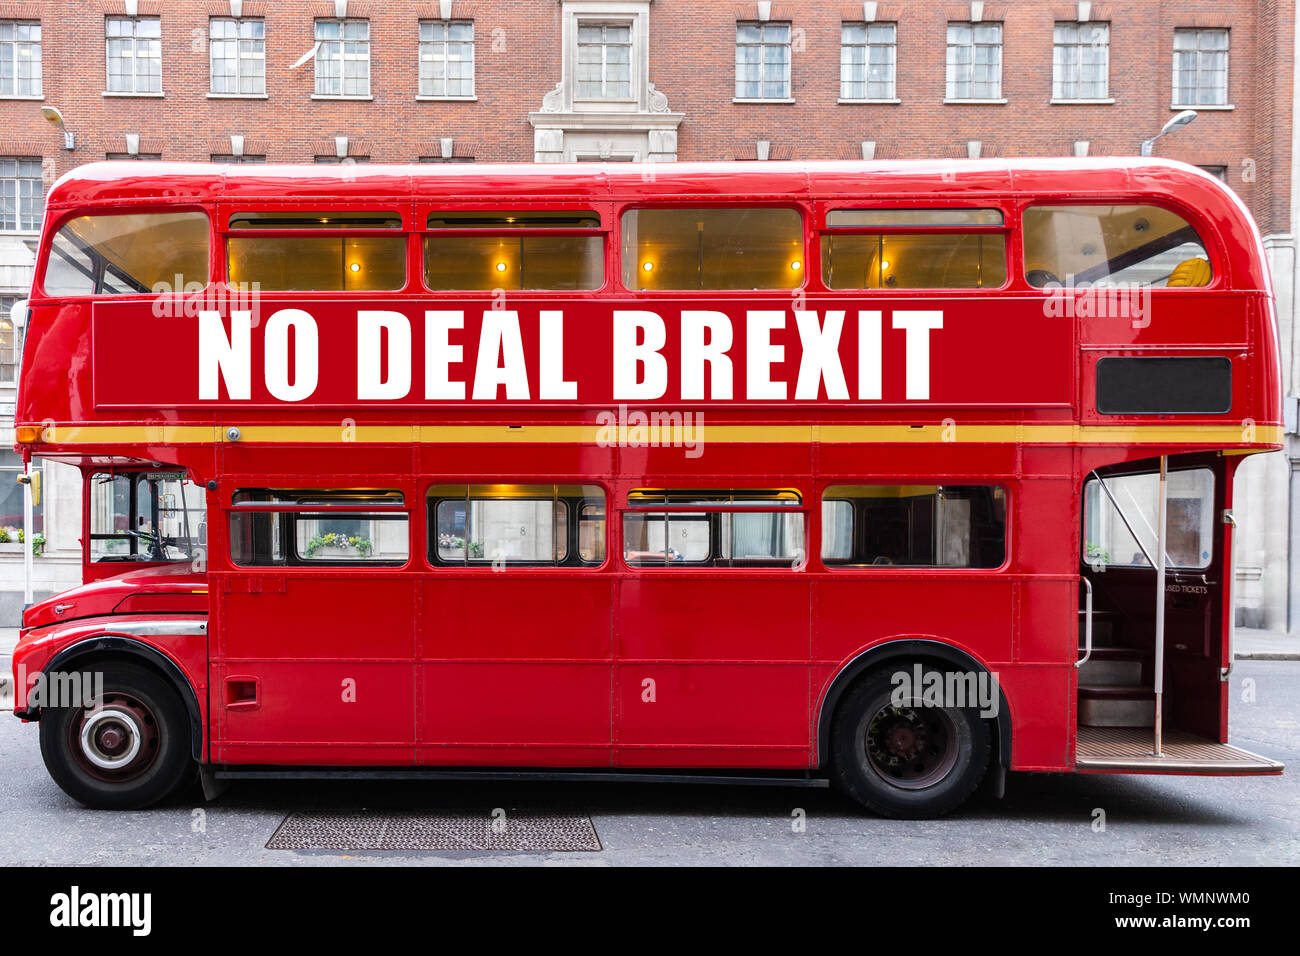 Old traditional london bus with 'no deal brexit' message on the side of the red bus Stock Photo